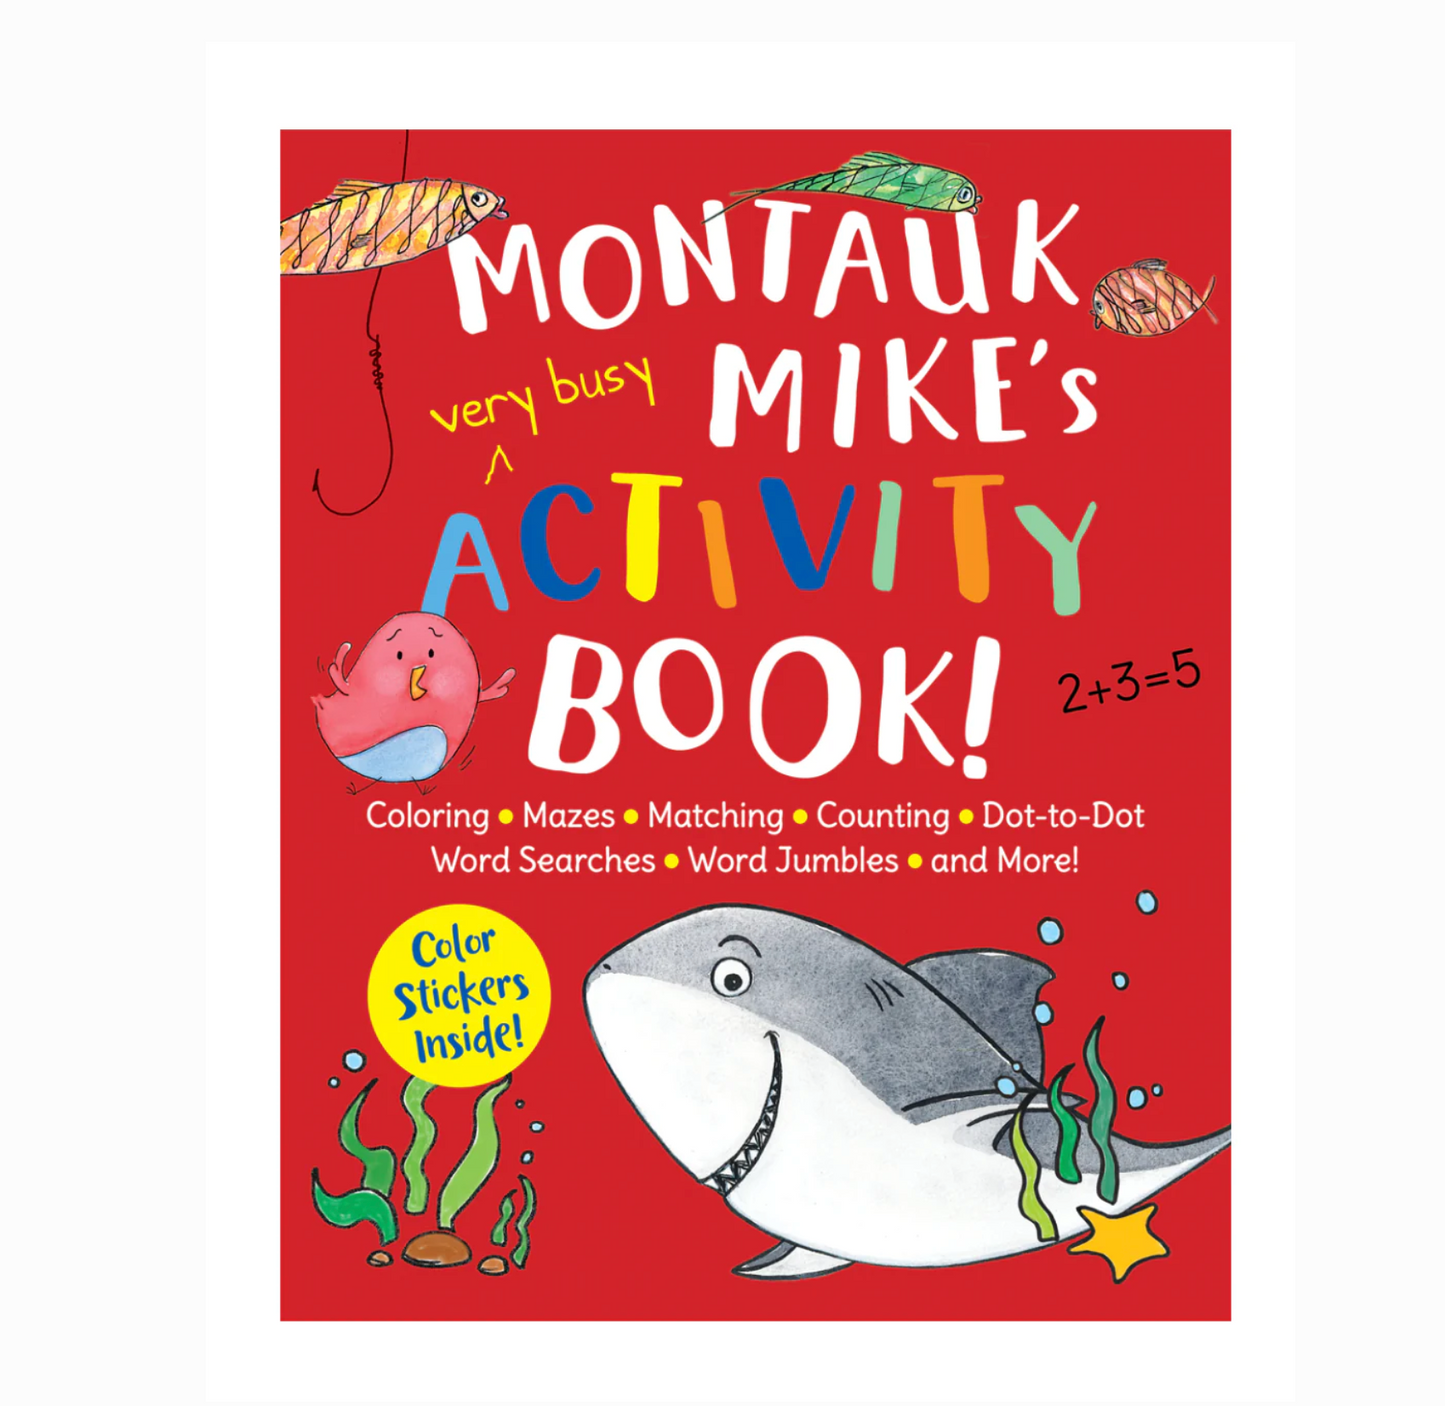 MONTAUK MIKE’S VERY BUSY ACTIVITY BOOK